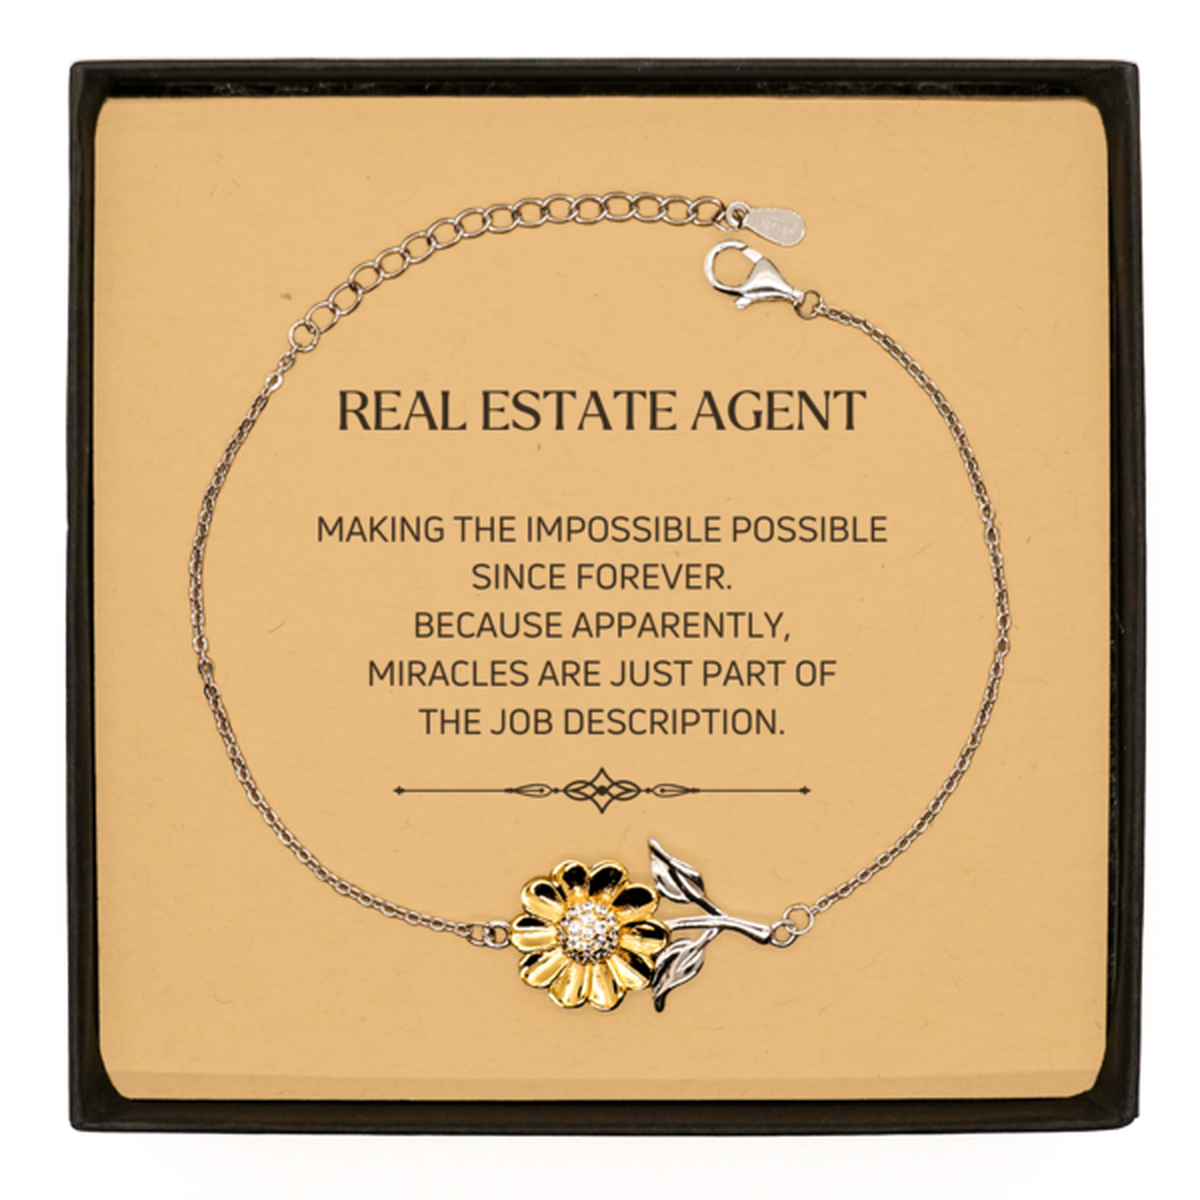 Funny Real Estate Agent Gifts, Miracles are just part of the job description, Inspirational Birthday Sunflower Bracelet For Real Estate Agent, Men, Women, Coworkers, Friends, Boss